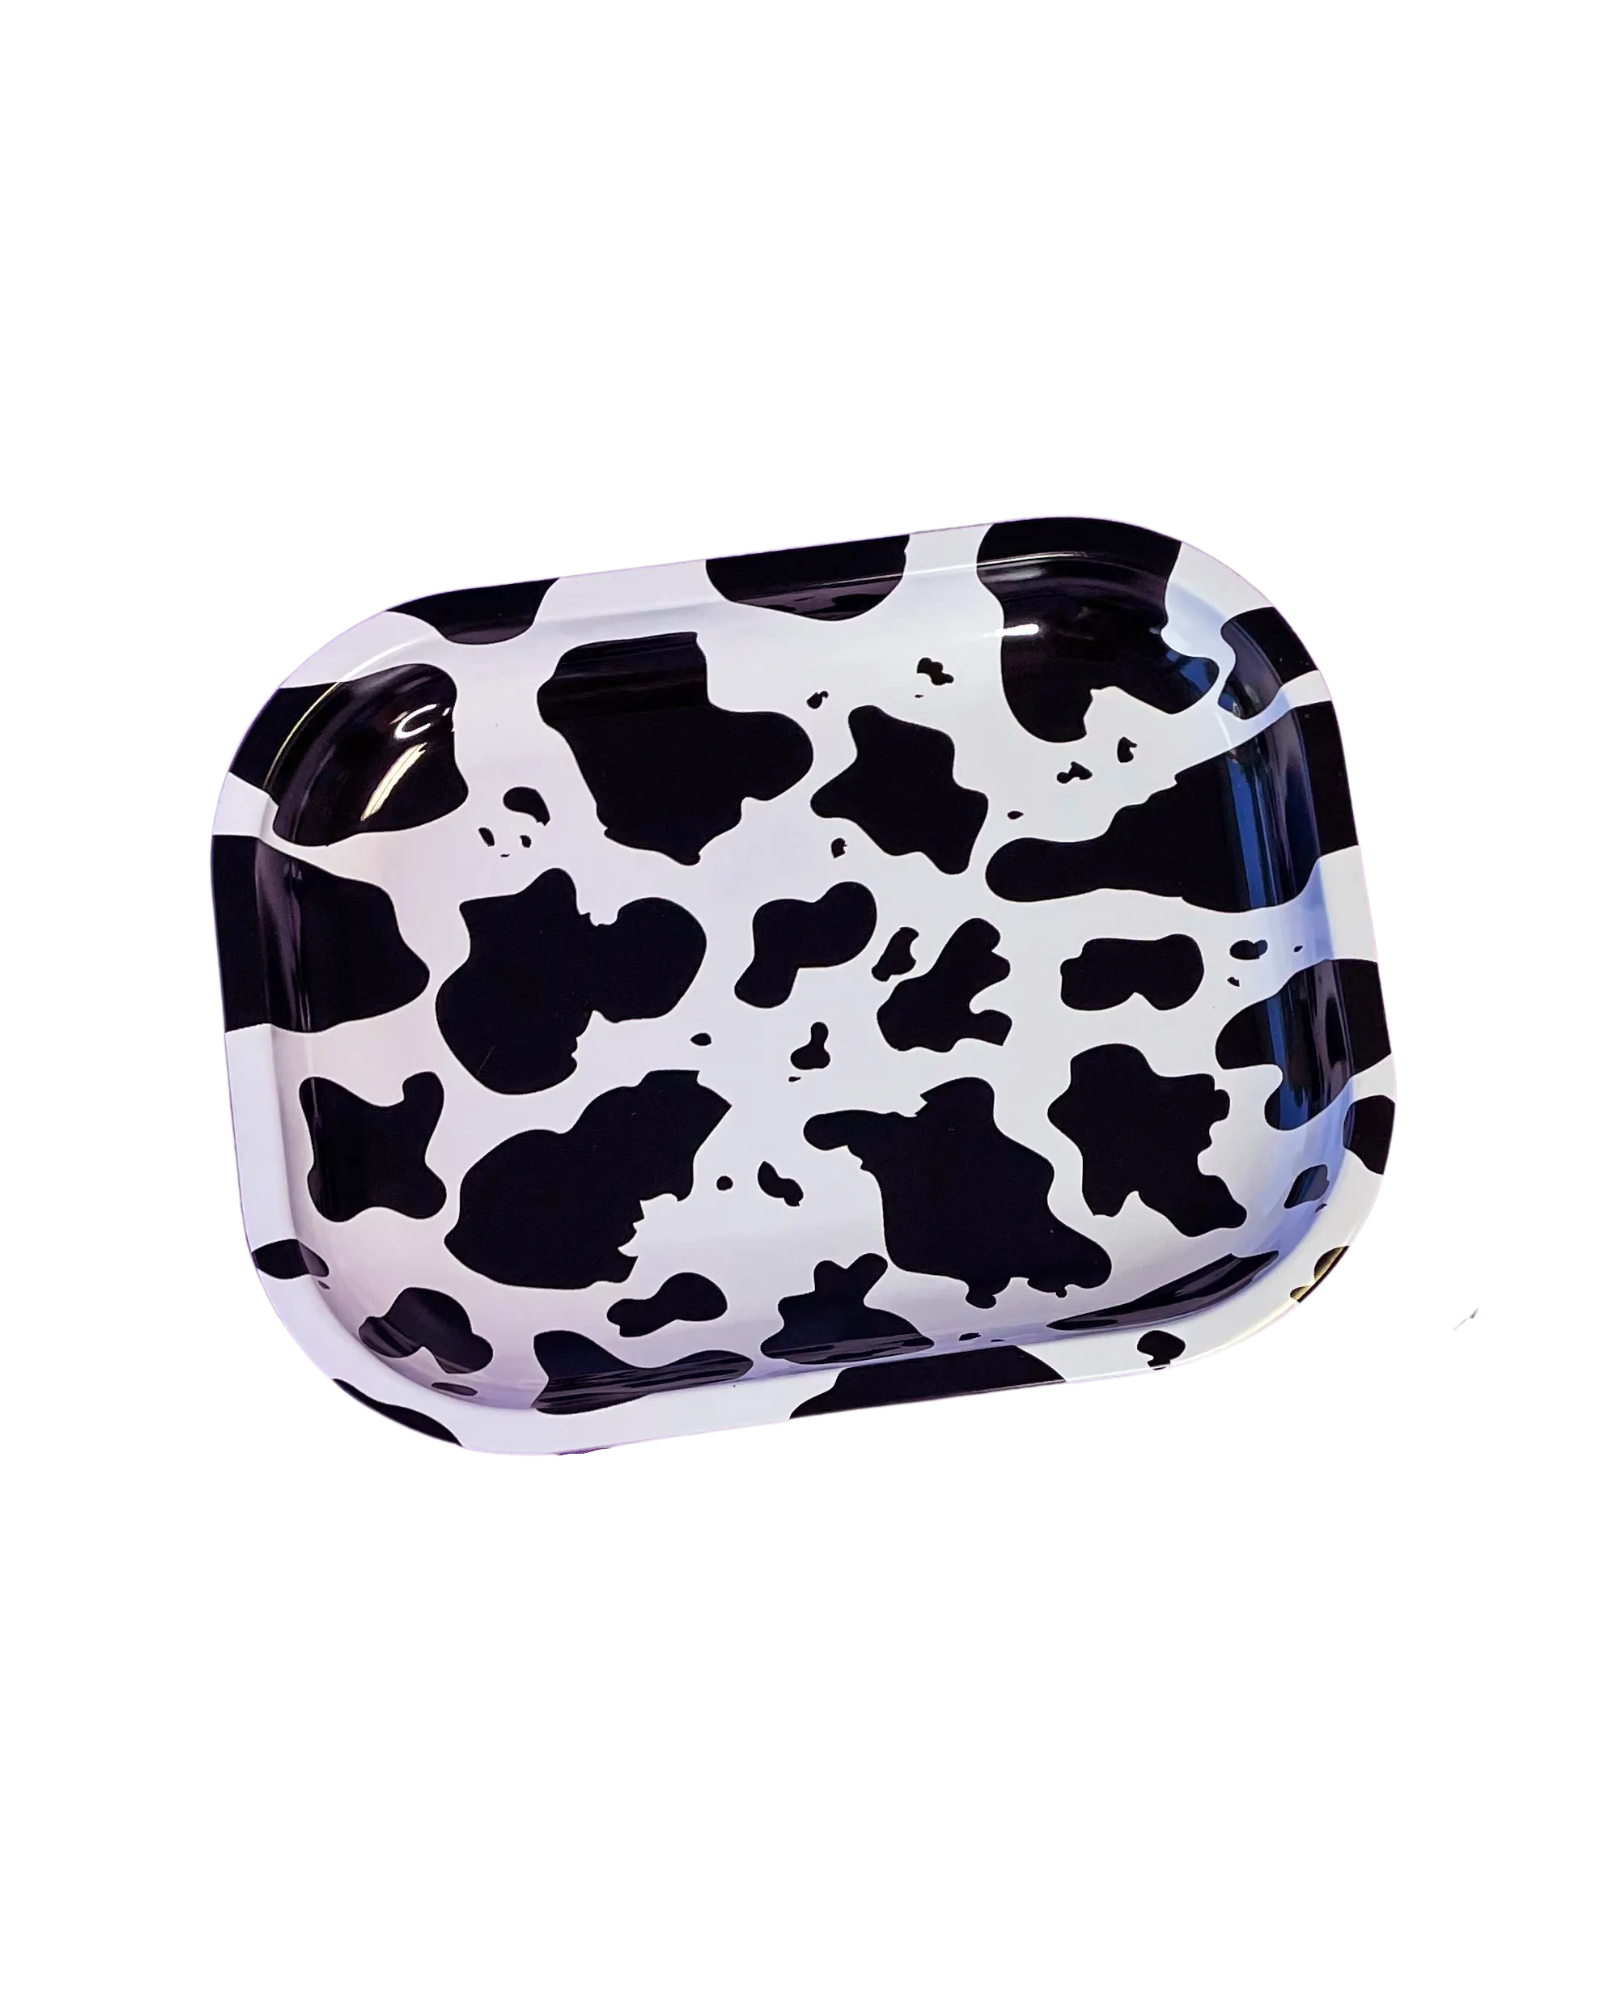 Rectangular shallow metal tray with cow spot print in black and white